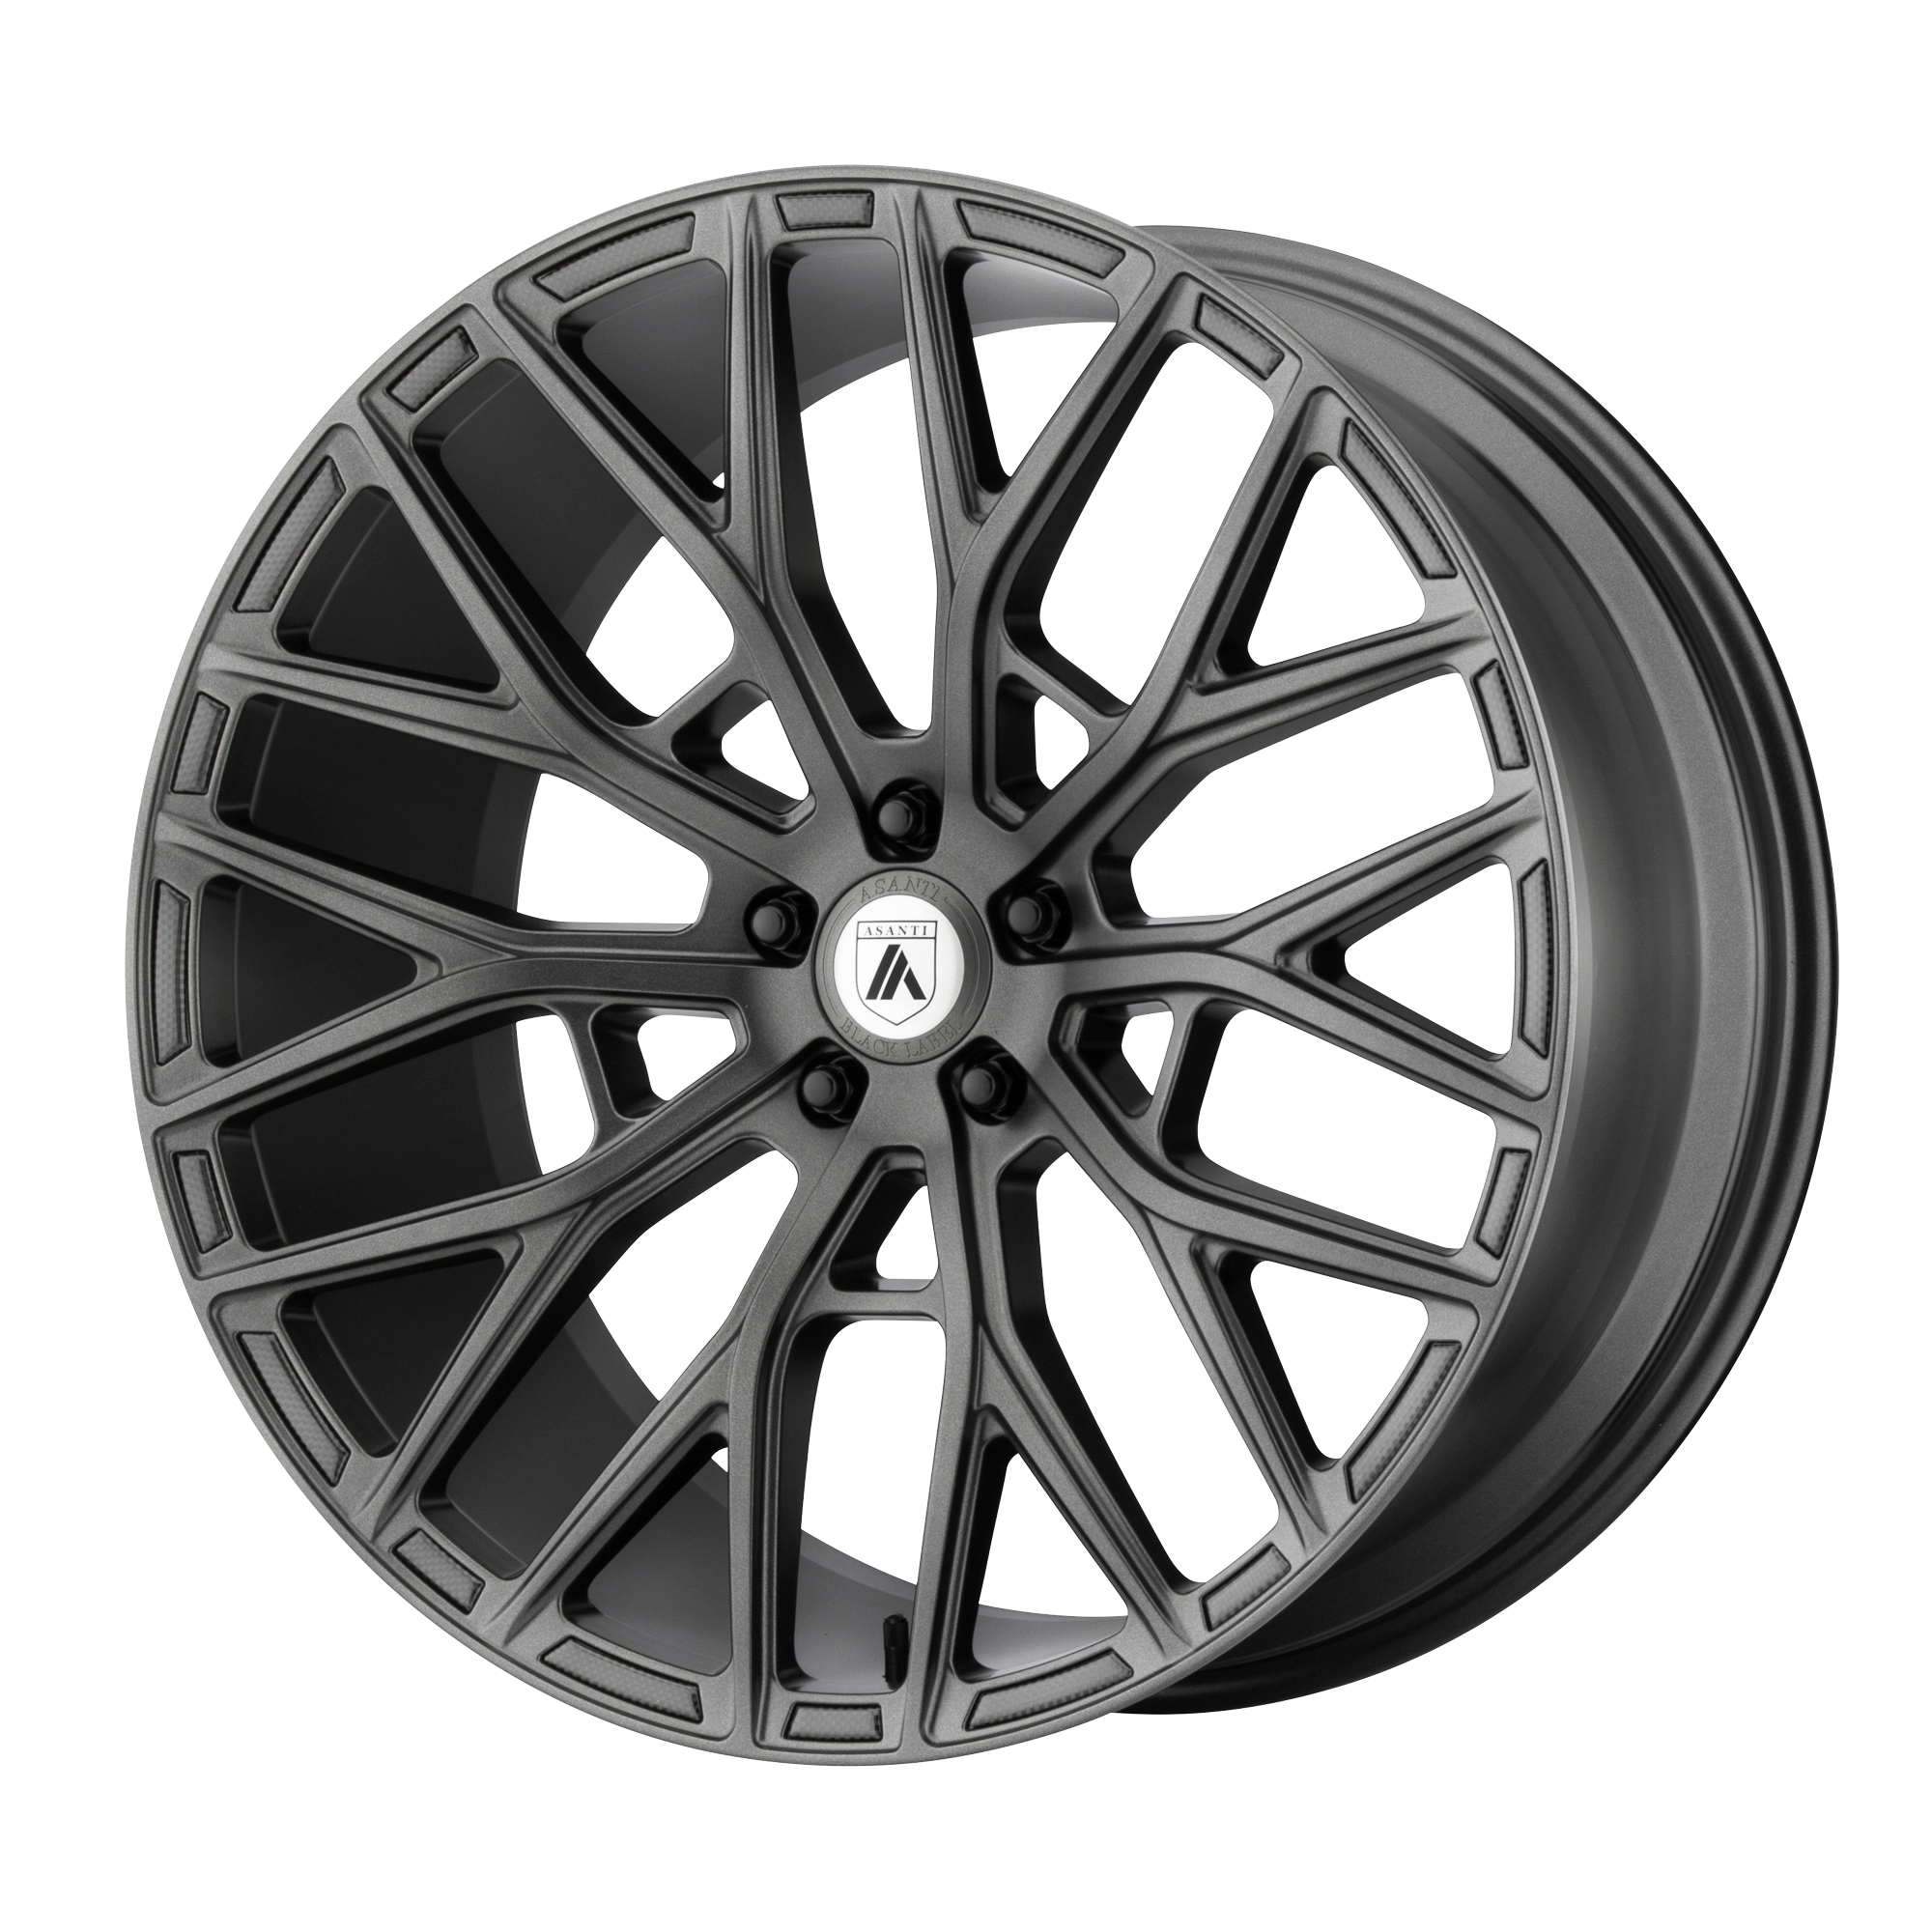 LEO 20x9 Blank MATTE GRAPHITE (35 mm) - Tires and Engine Performance